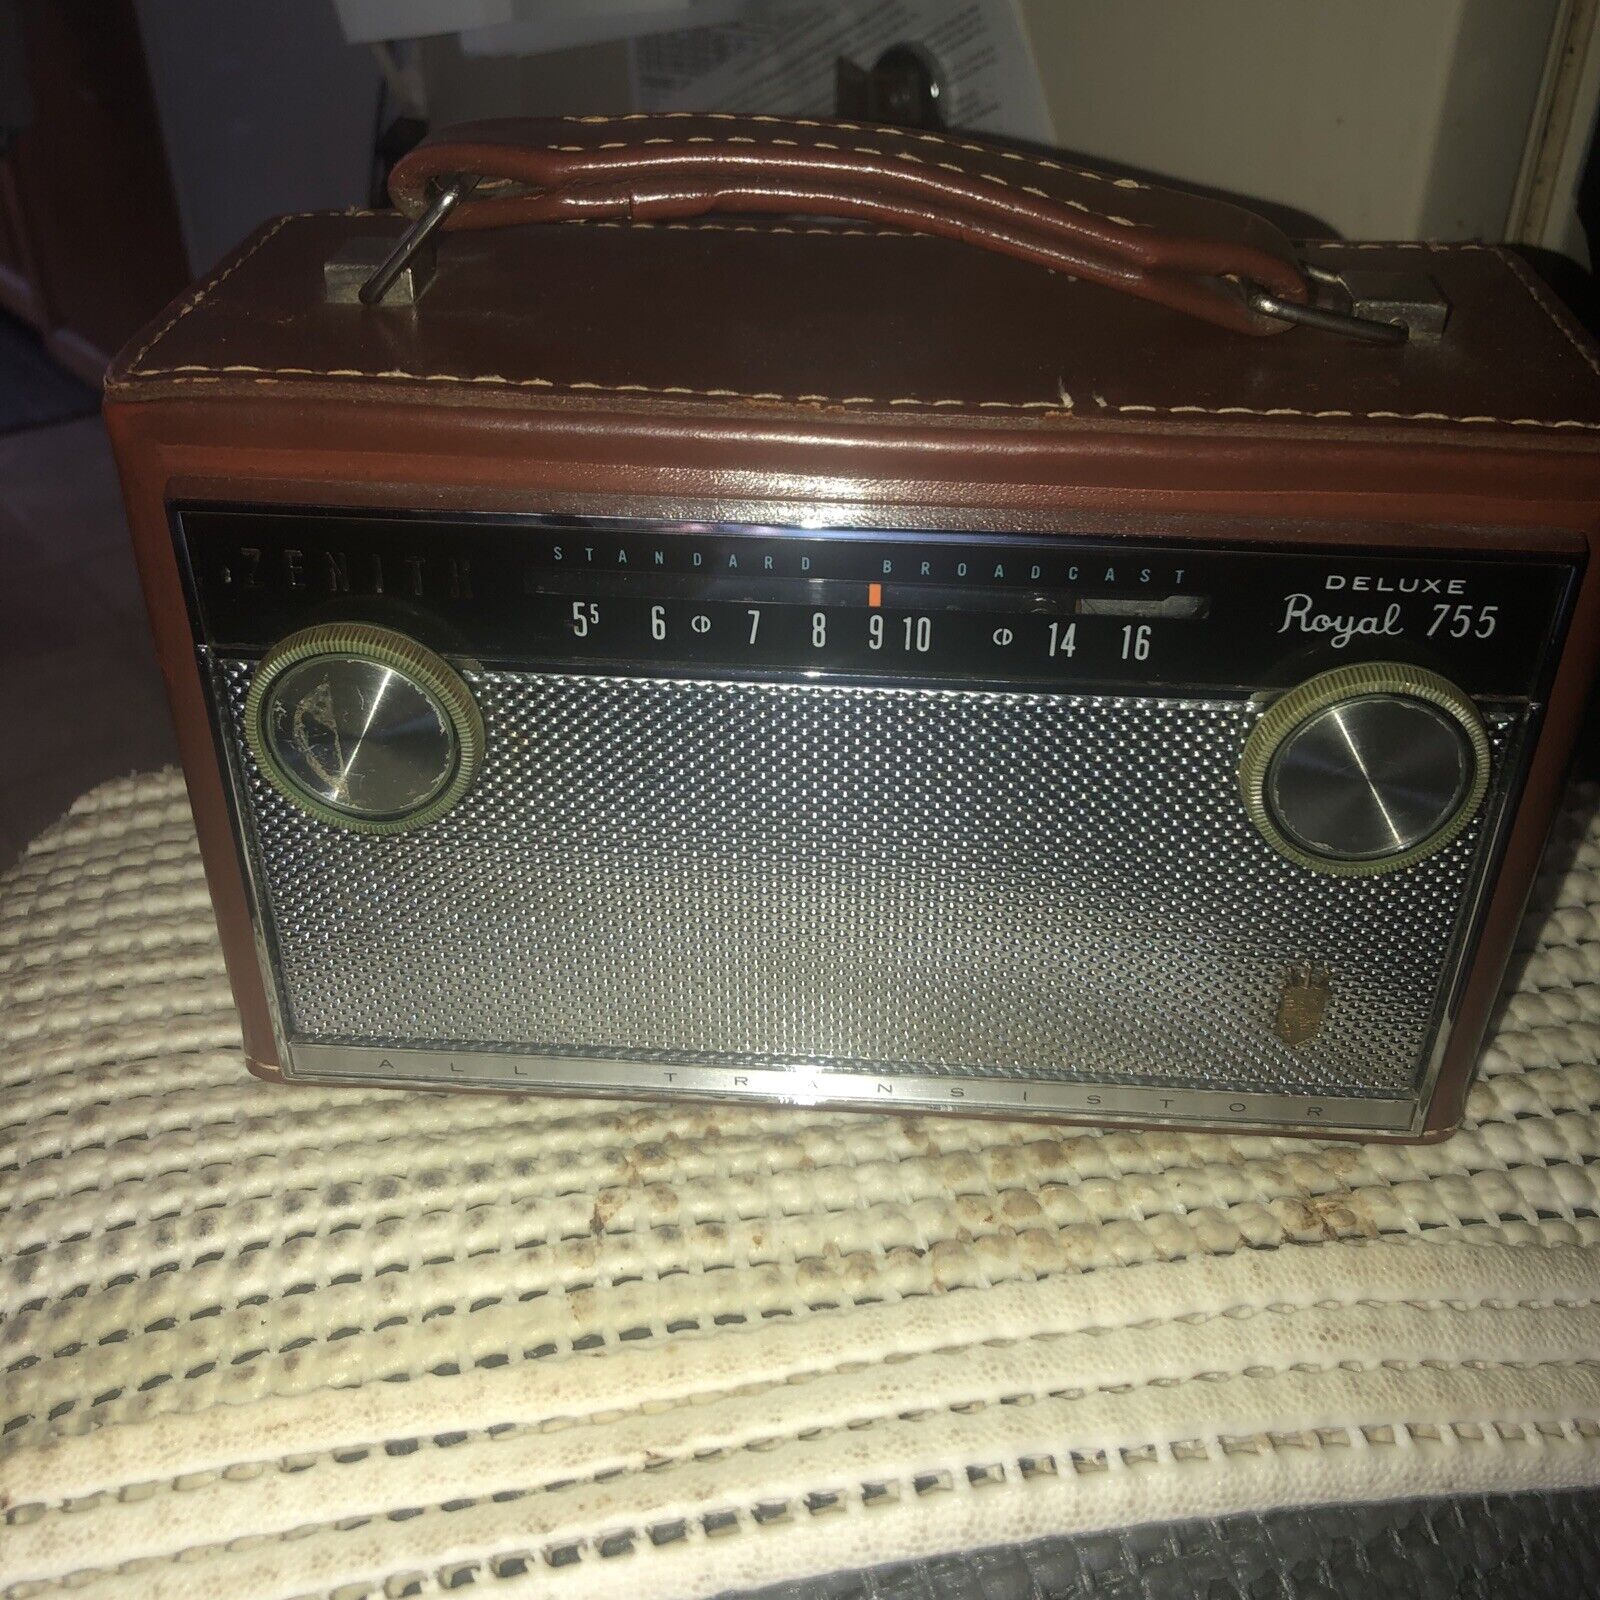 Vintage Zenith Deluxe Royal 755 AM Transistor Leather Radio Works Well Rare